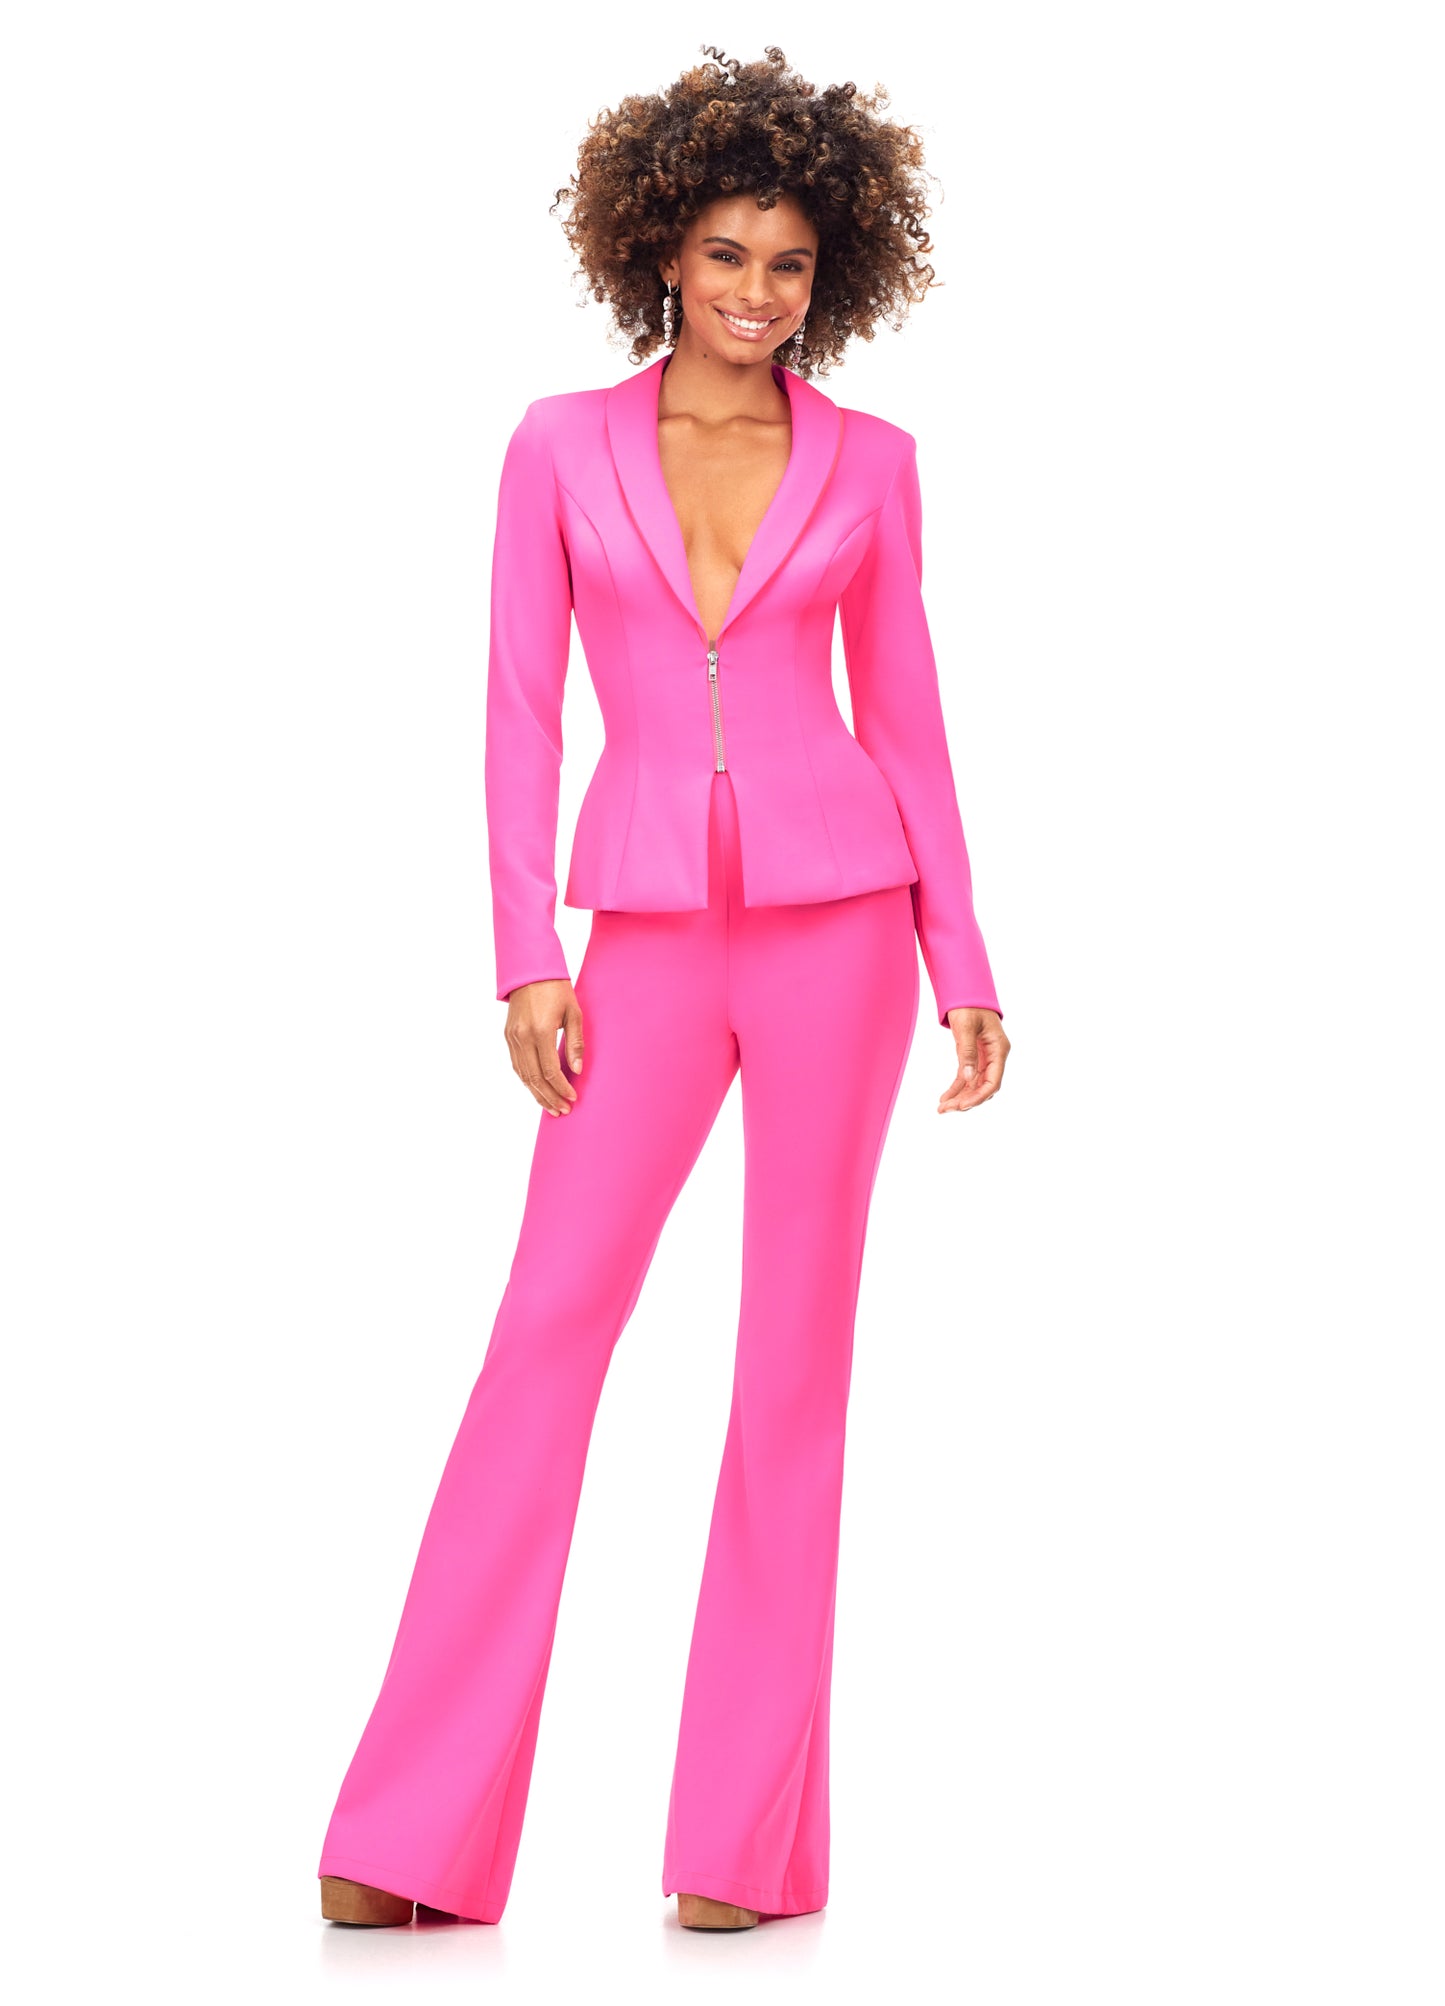 Ashley Lauren 11225 This powerful scuba pantsuit features a blazer with an exposed metal zipper. The flare pants complete the look. Two Piece Pantsuit Scuba Exposed Front Zipper Flare Pants Hot Pink